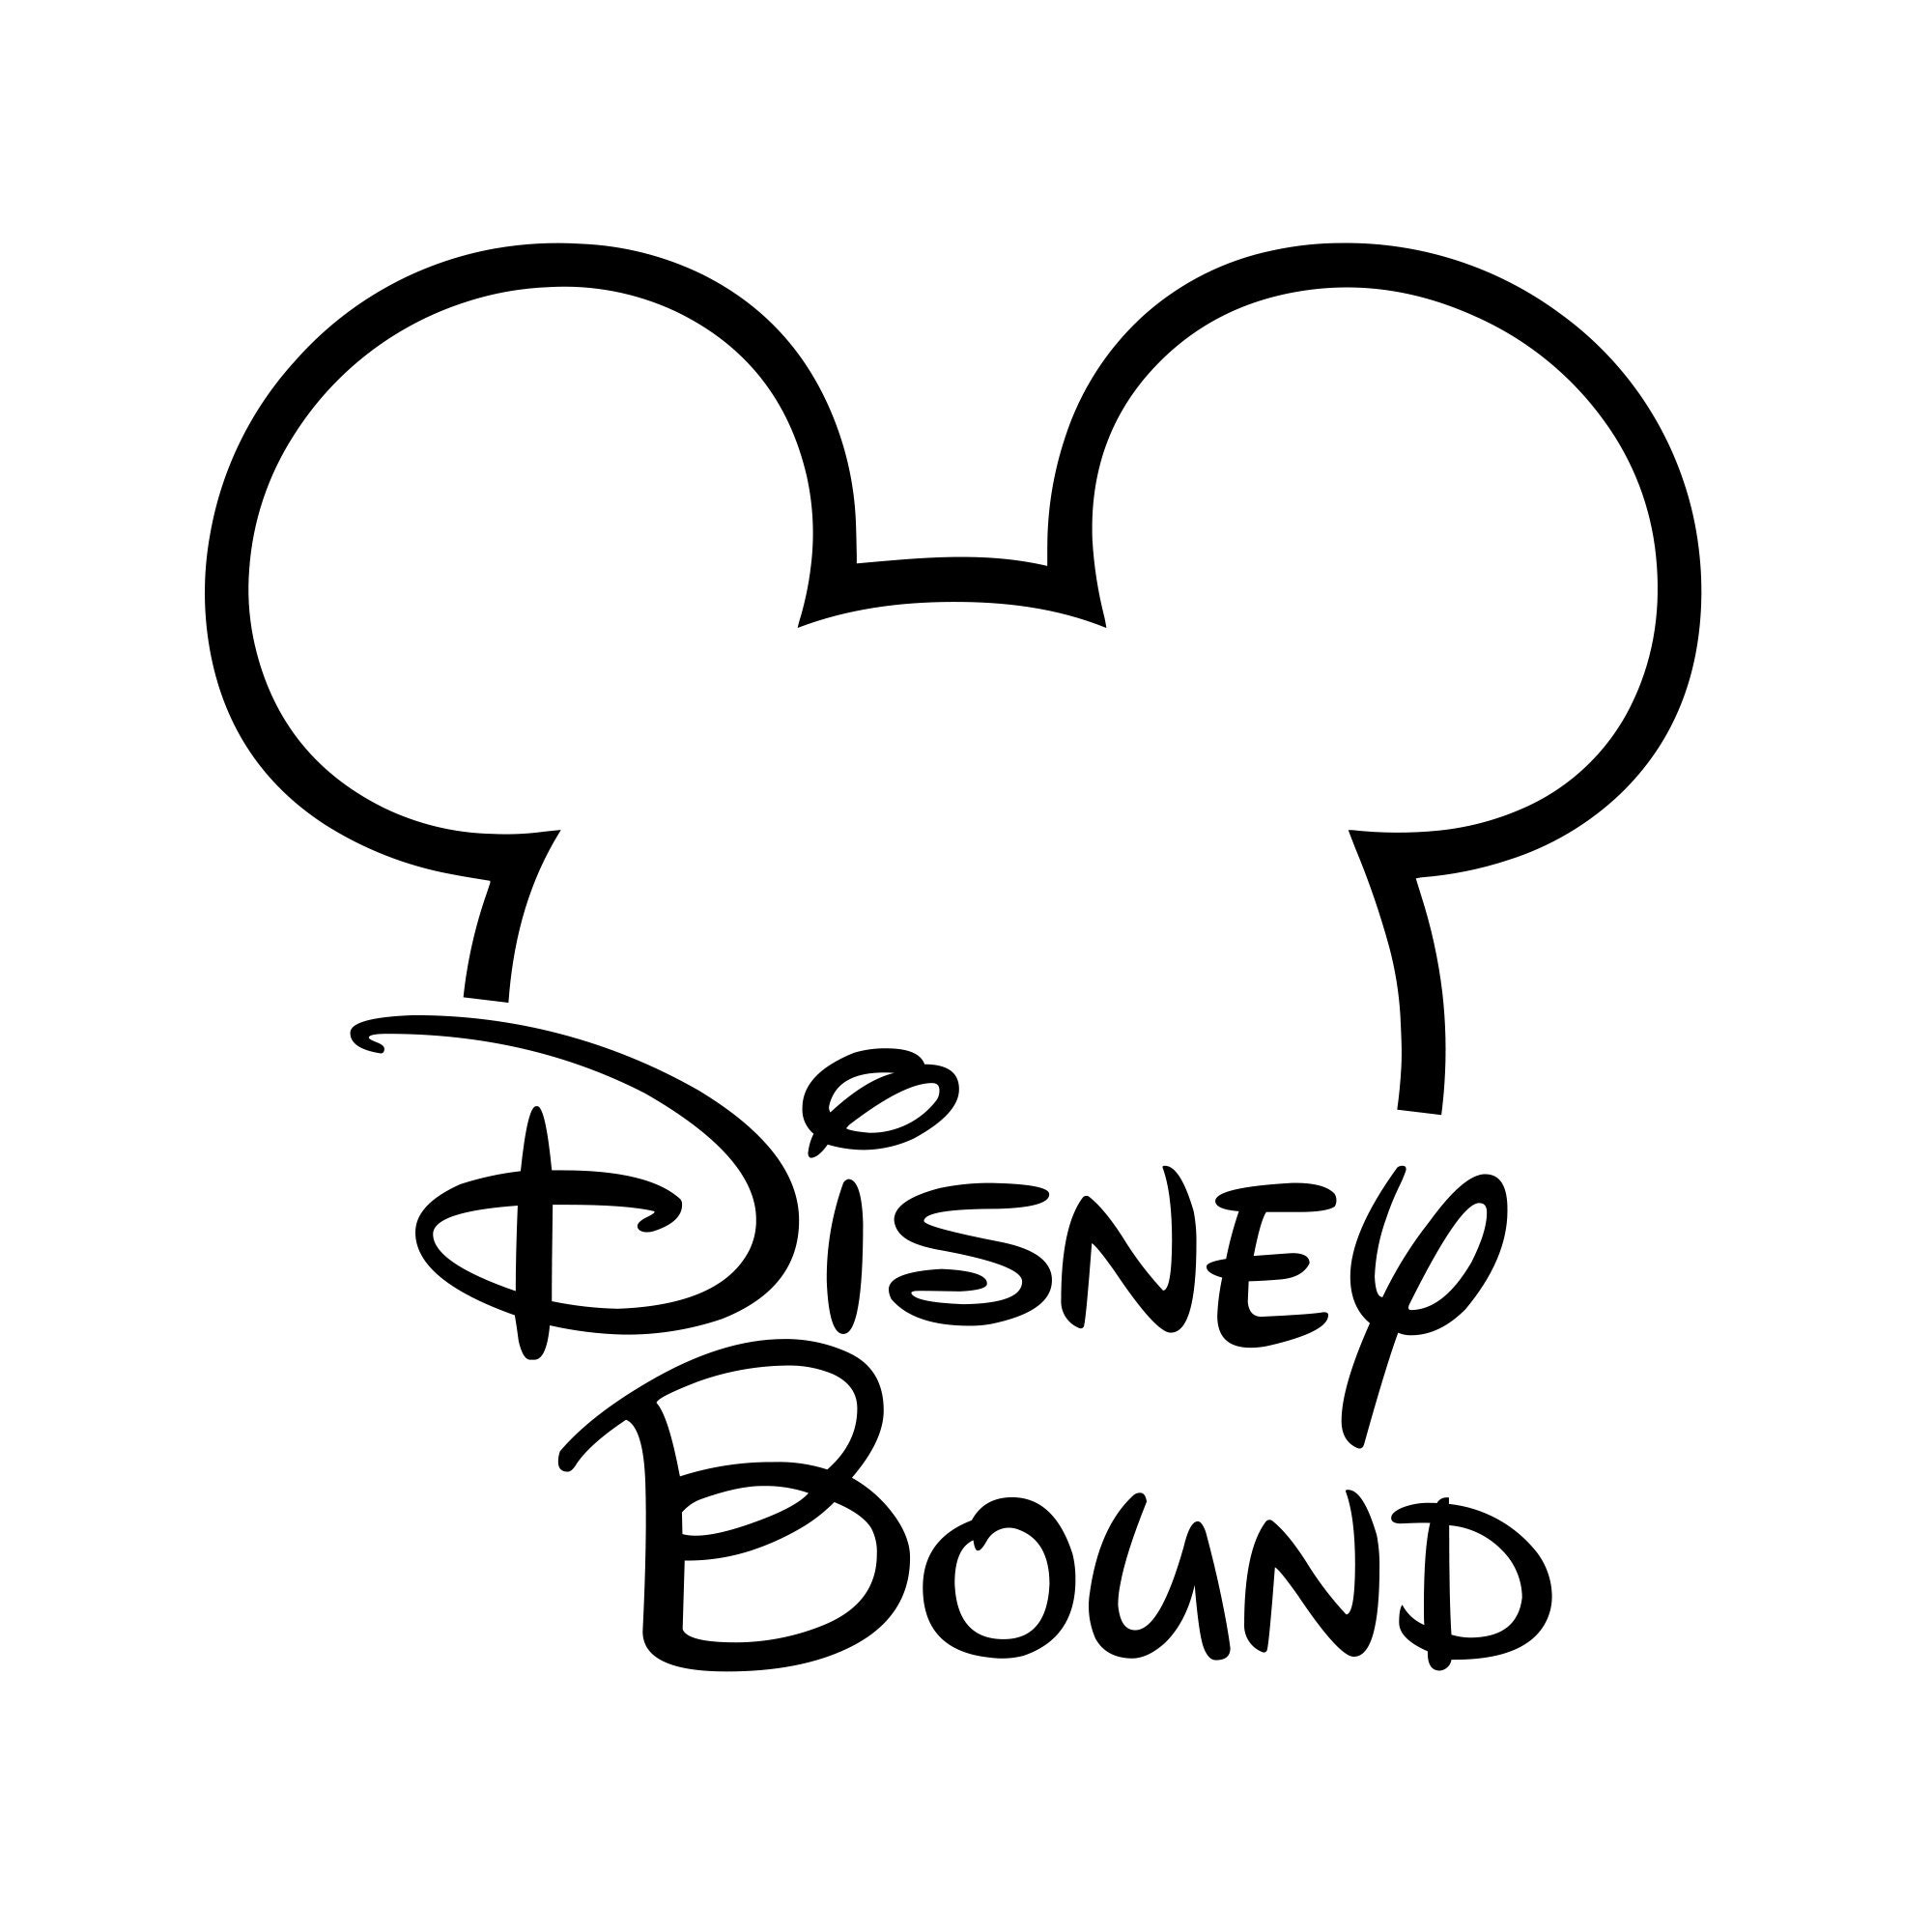 mickey mouse silhouette template